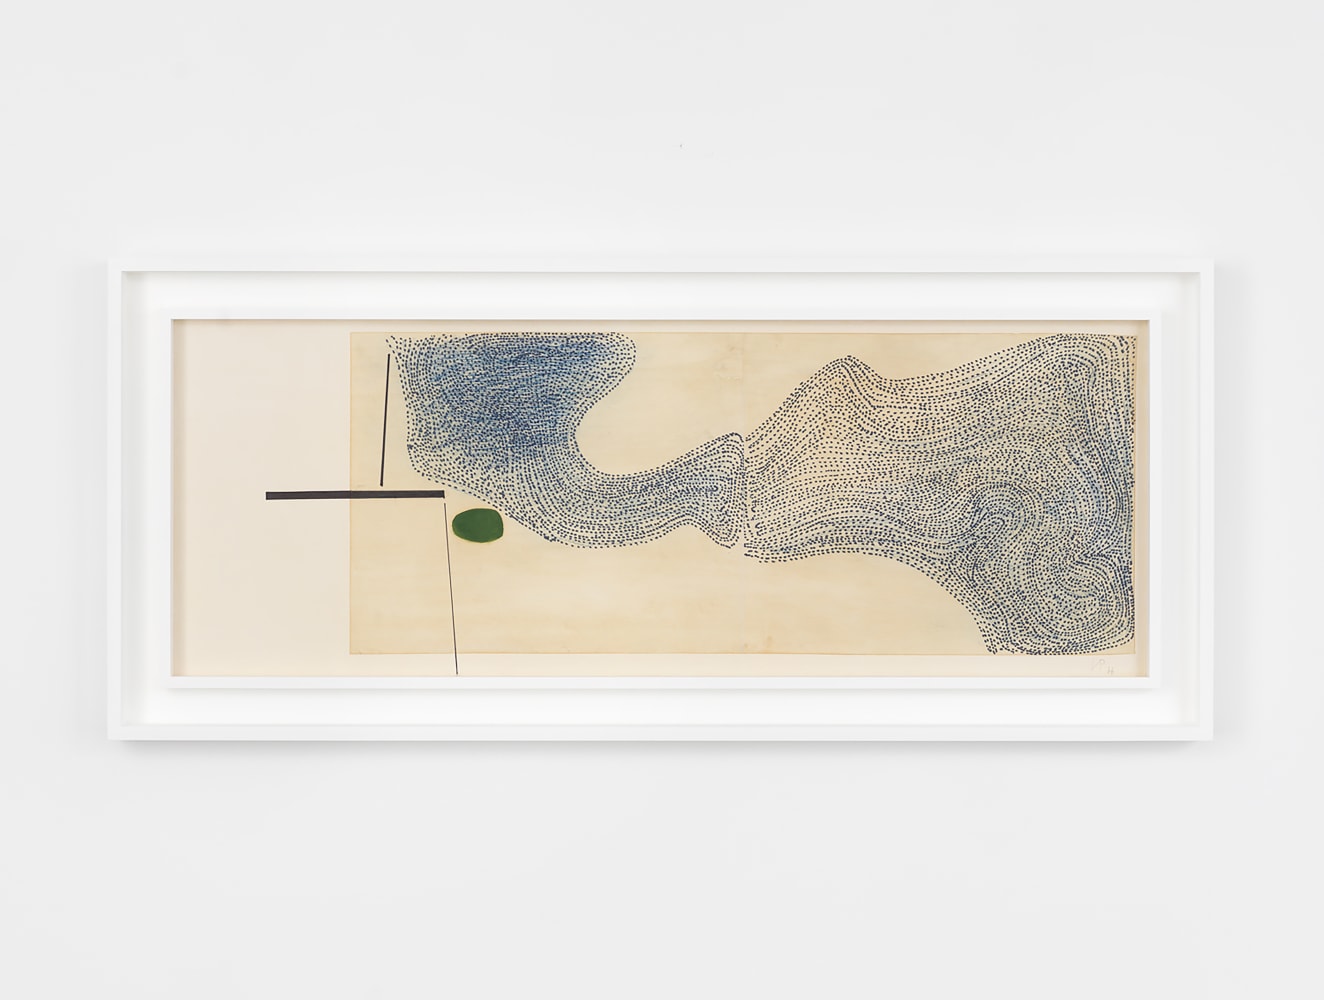 Victor Pasmore
Point Development (Blue), 1966
oil on paper on canvas
20 &amp;times; 54 in. / 50.8 &amp;times; 137.2 cm